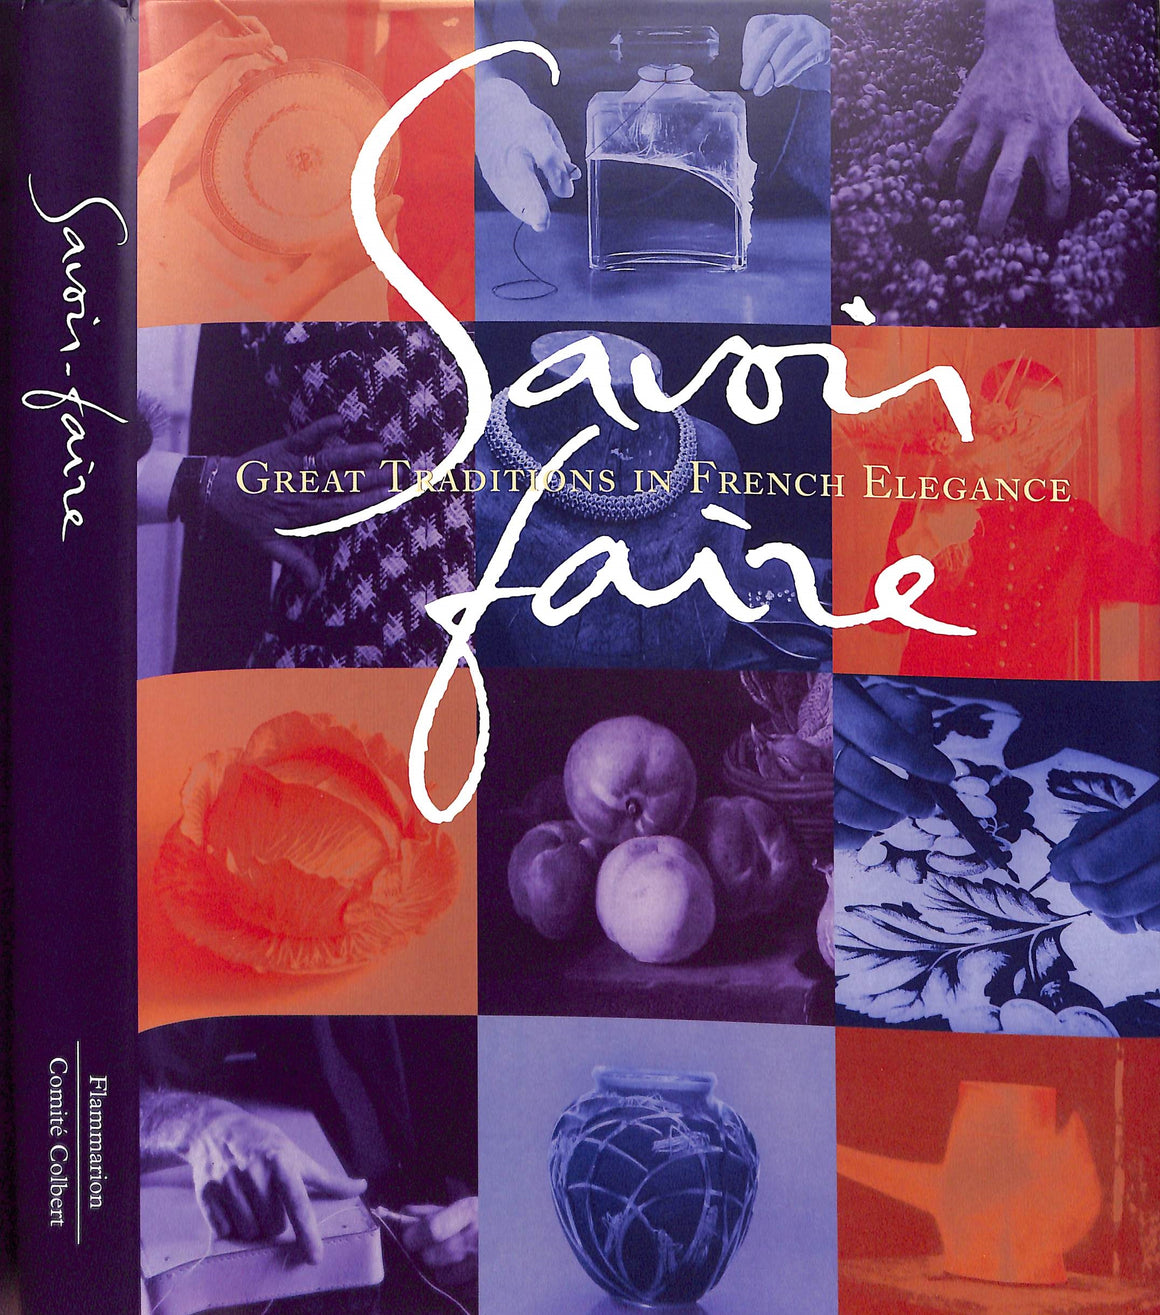 "Savoir-Faire: Great Traditions In French Elegance" 1995 RIVAL, Pierre and BAUDOT, Francois